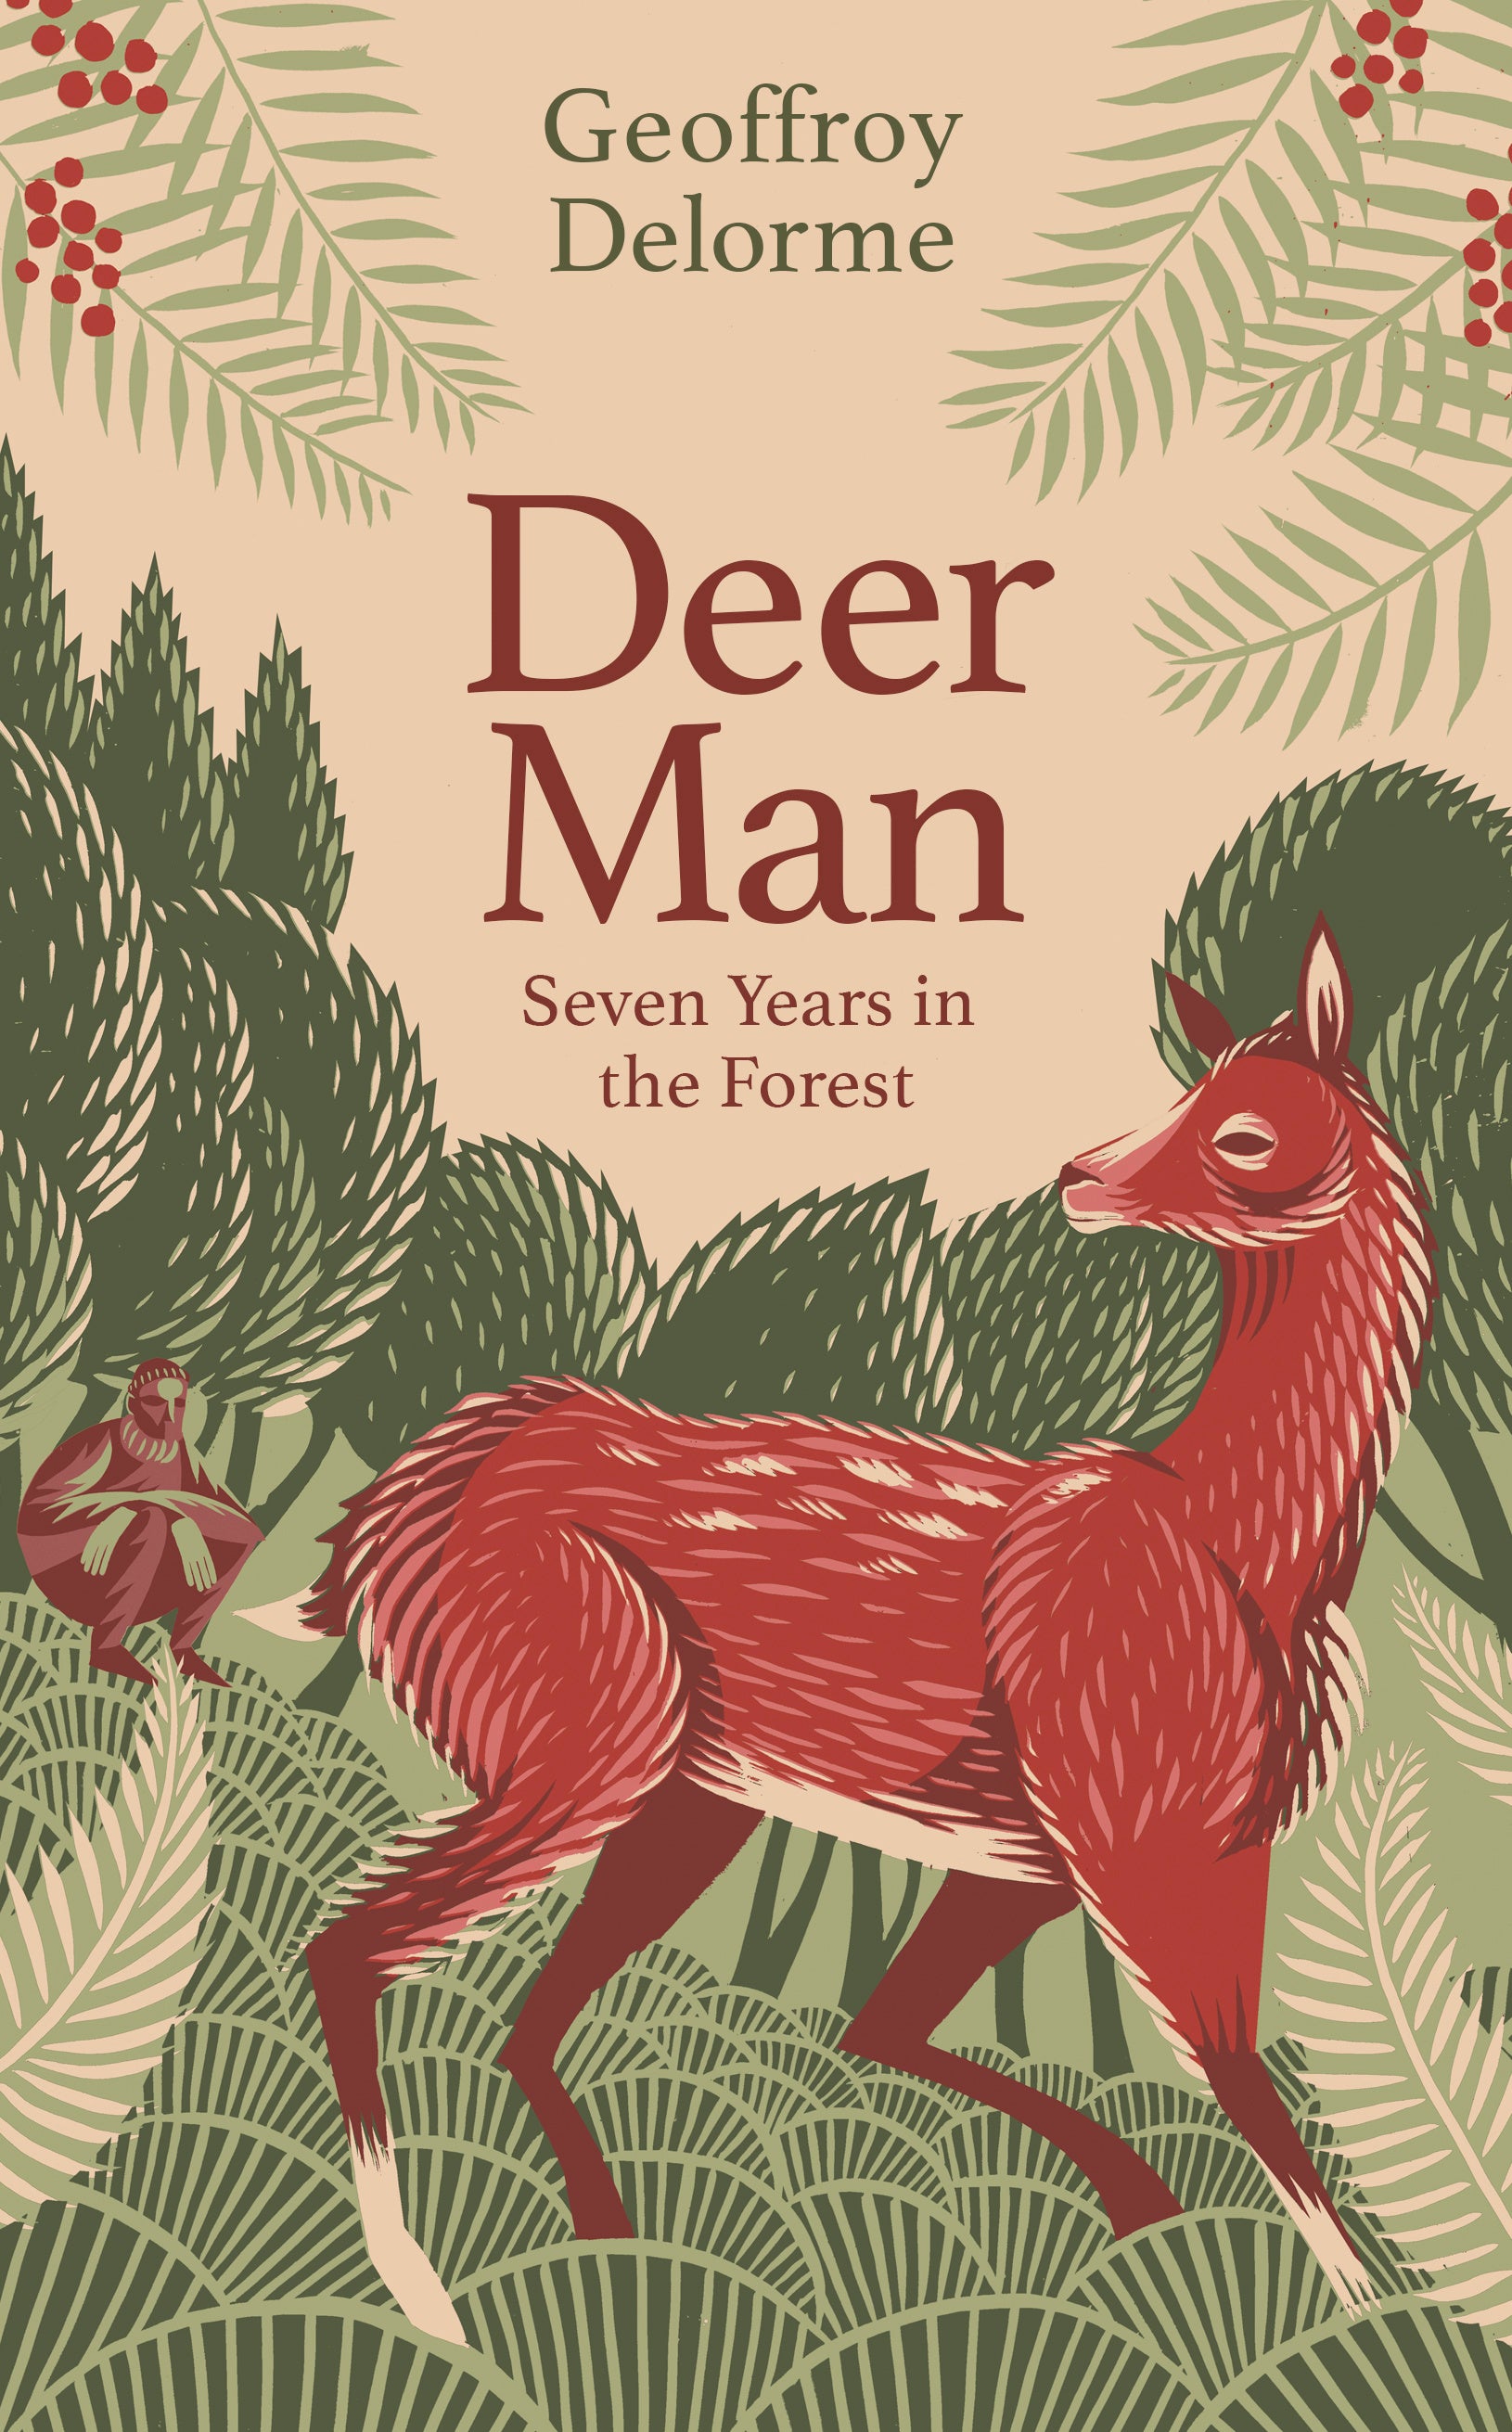 Deer Man: Seven Years in the Forest